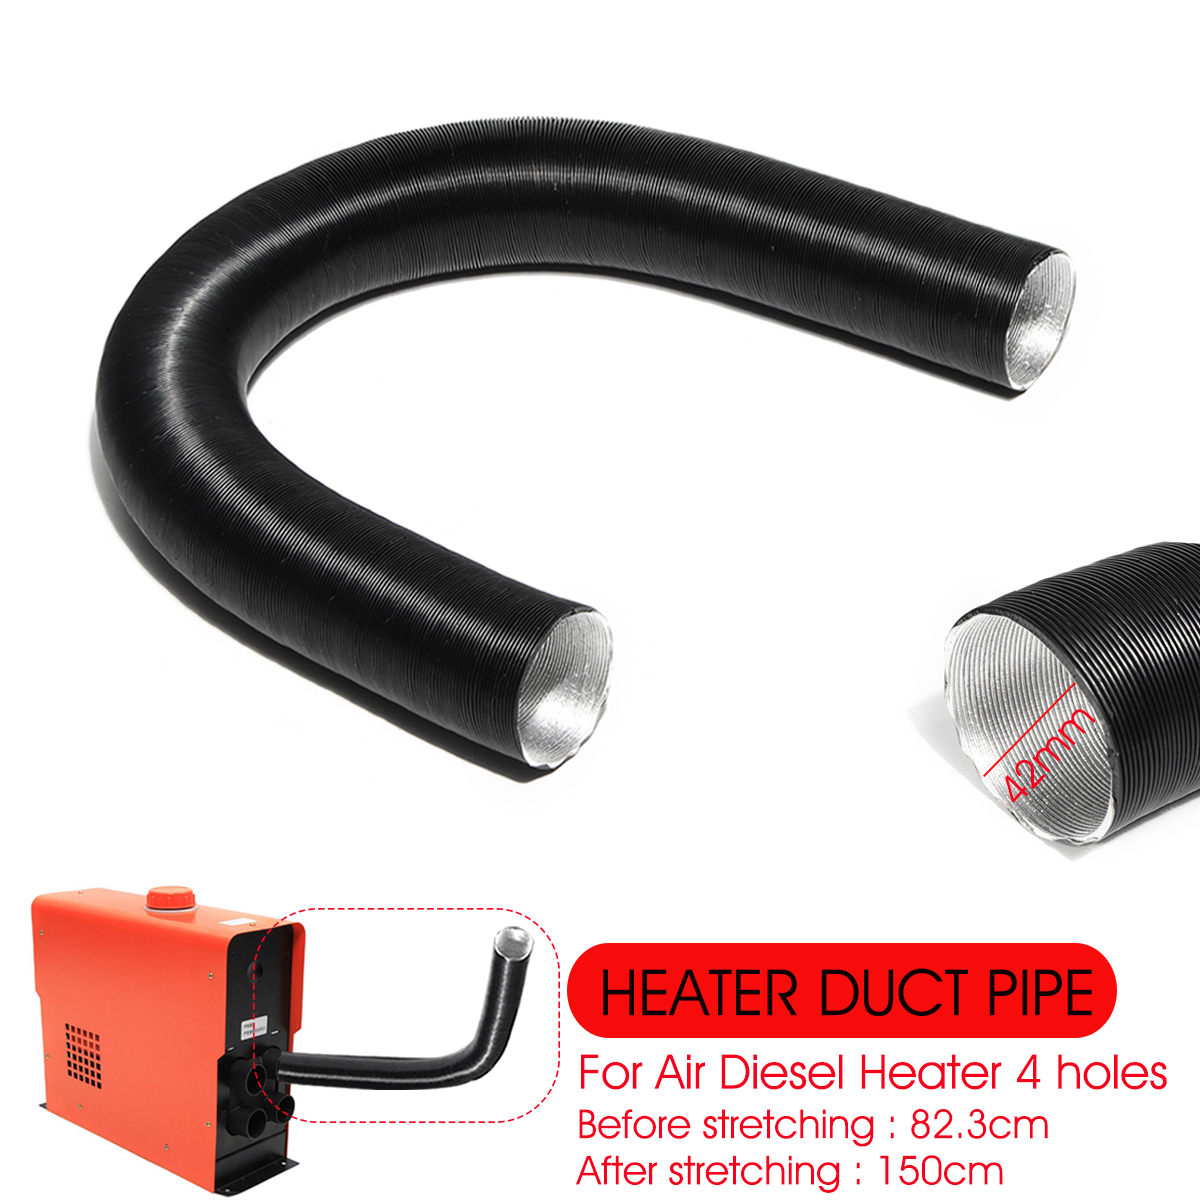 42mm-Outlet-Tube-Heater-Duct-Pipe-Air-Ducting-For-Air-Diesel-Heater-4-holes-Car-Truck-1632314-3